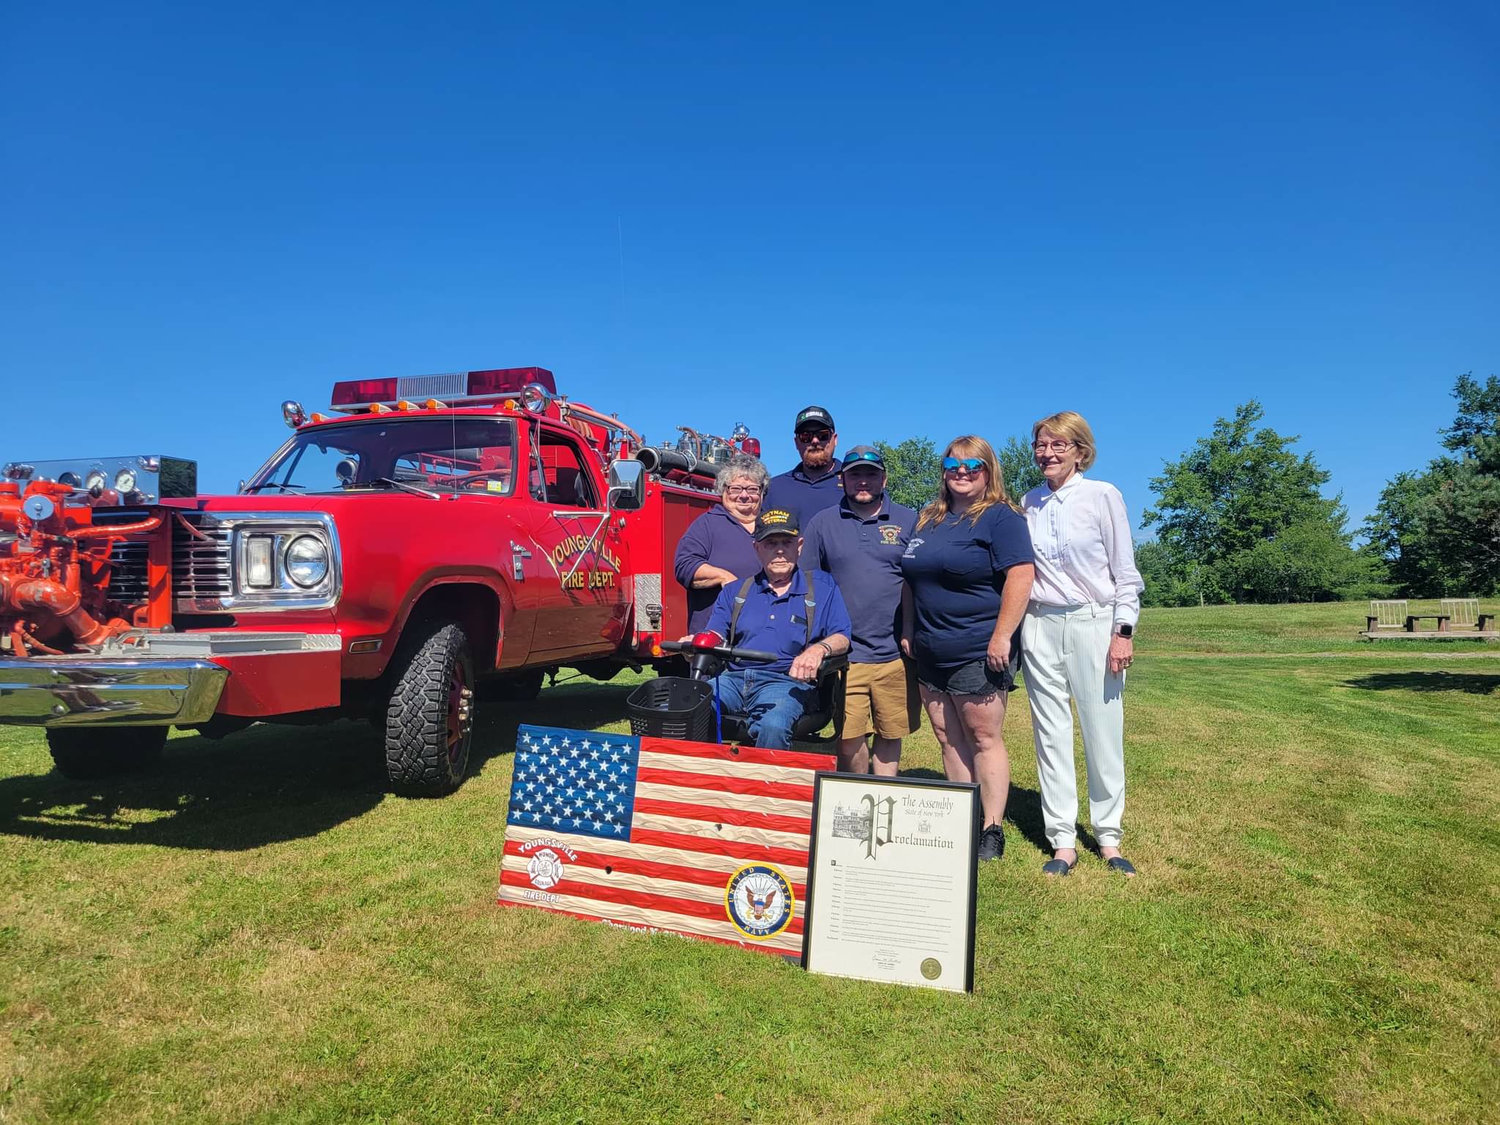 Woody McGibbon (sitting front), back row starting from left, wife Debra McGibbon, son-in-law Ben Creegan, son Jonathan McGibbon (also the president of fire department), daughter Amber Creegan and Assemblywoman Gunther.